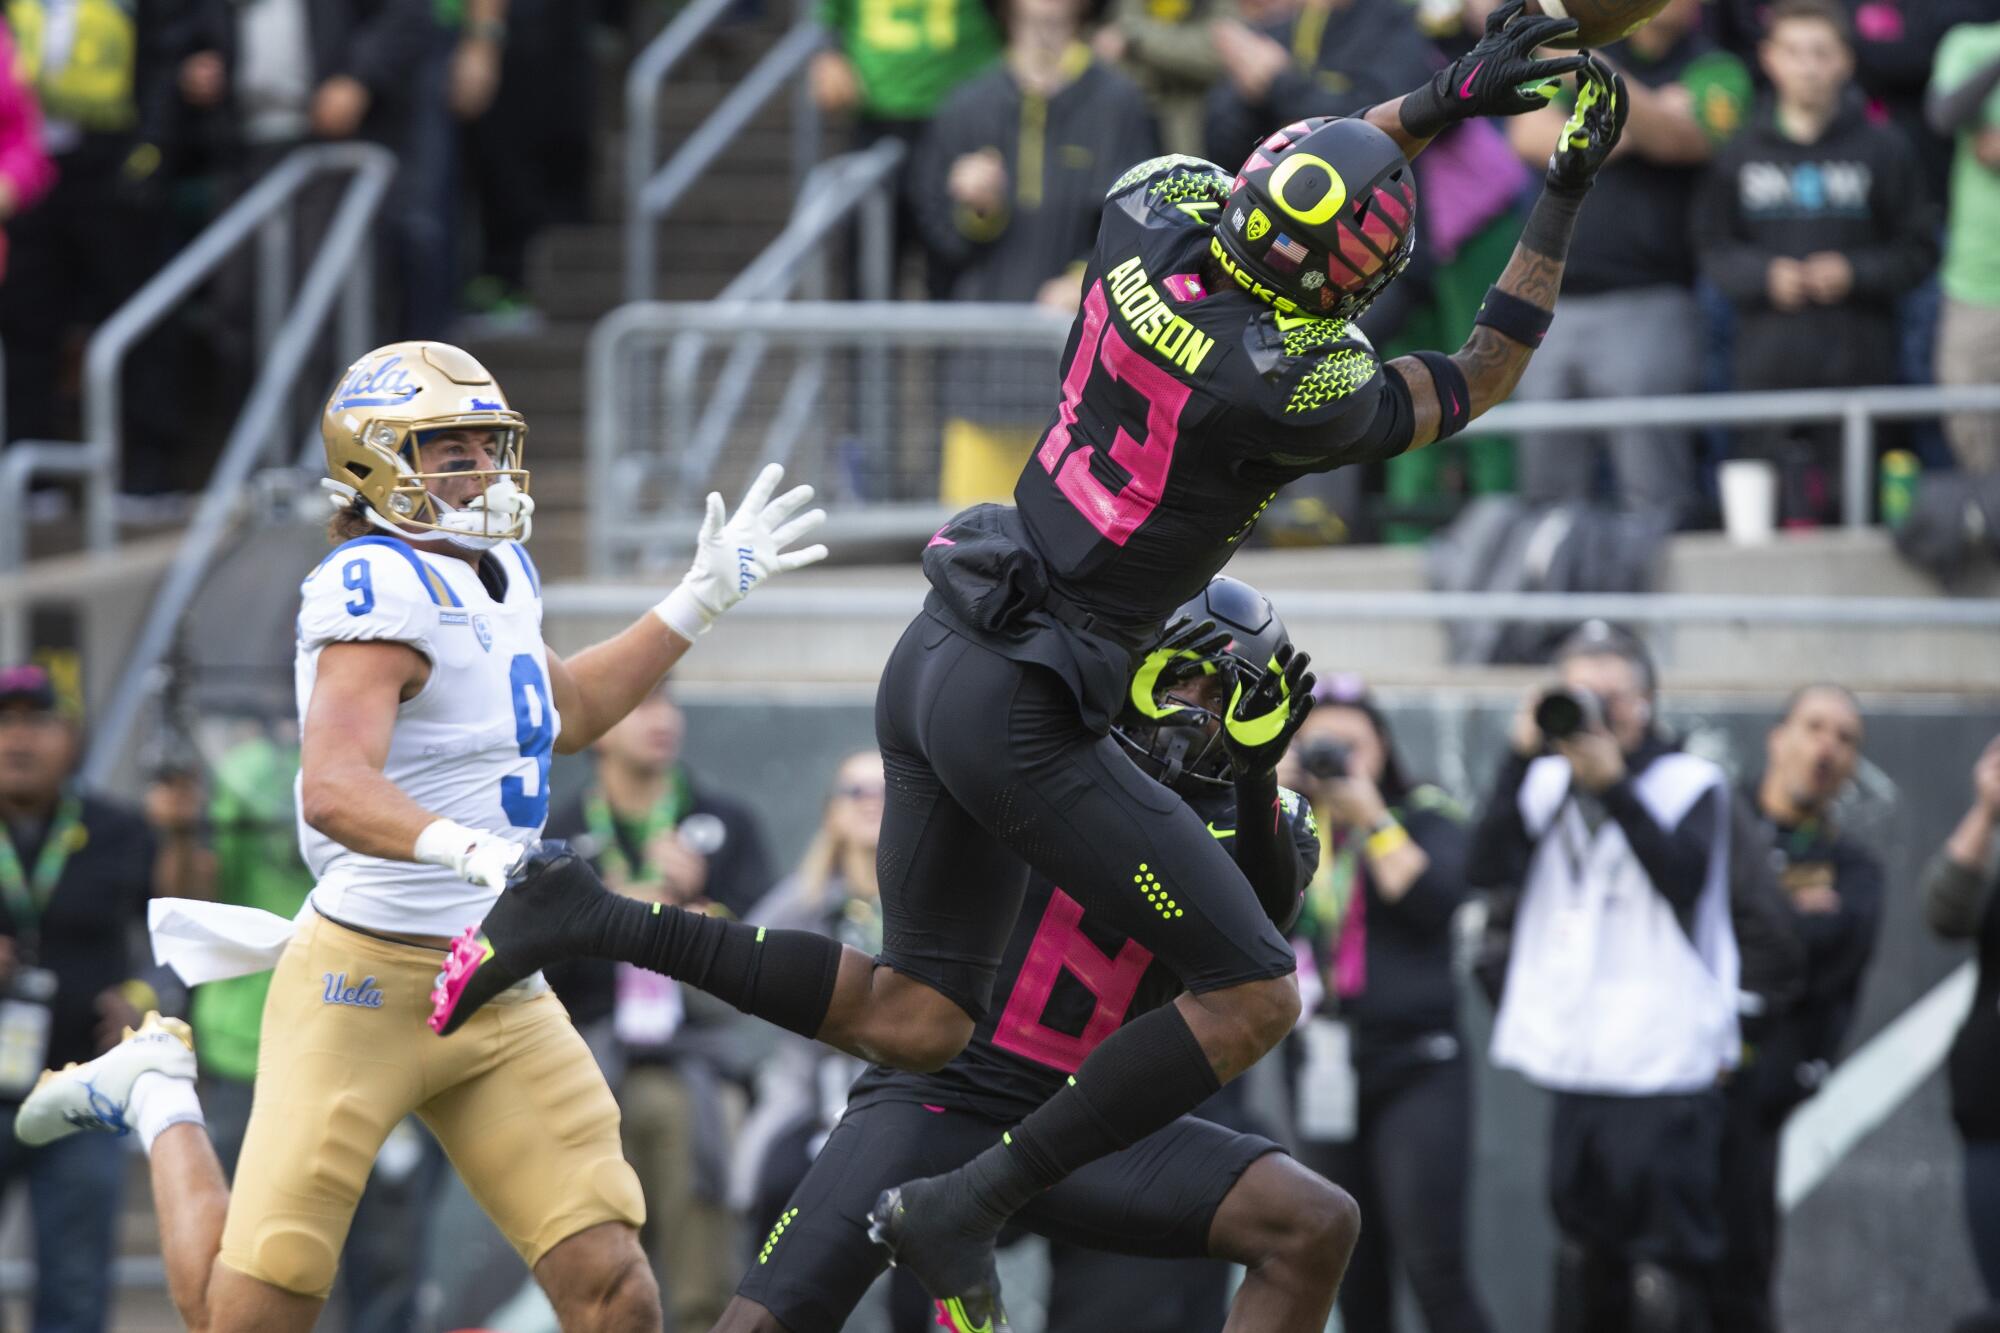 Oregon's Bryan Addison breaks up a pass play in the end zone intended for UCLA's Jake Bobo.